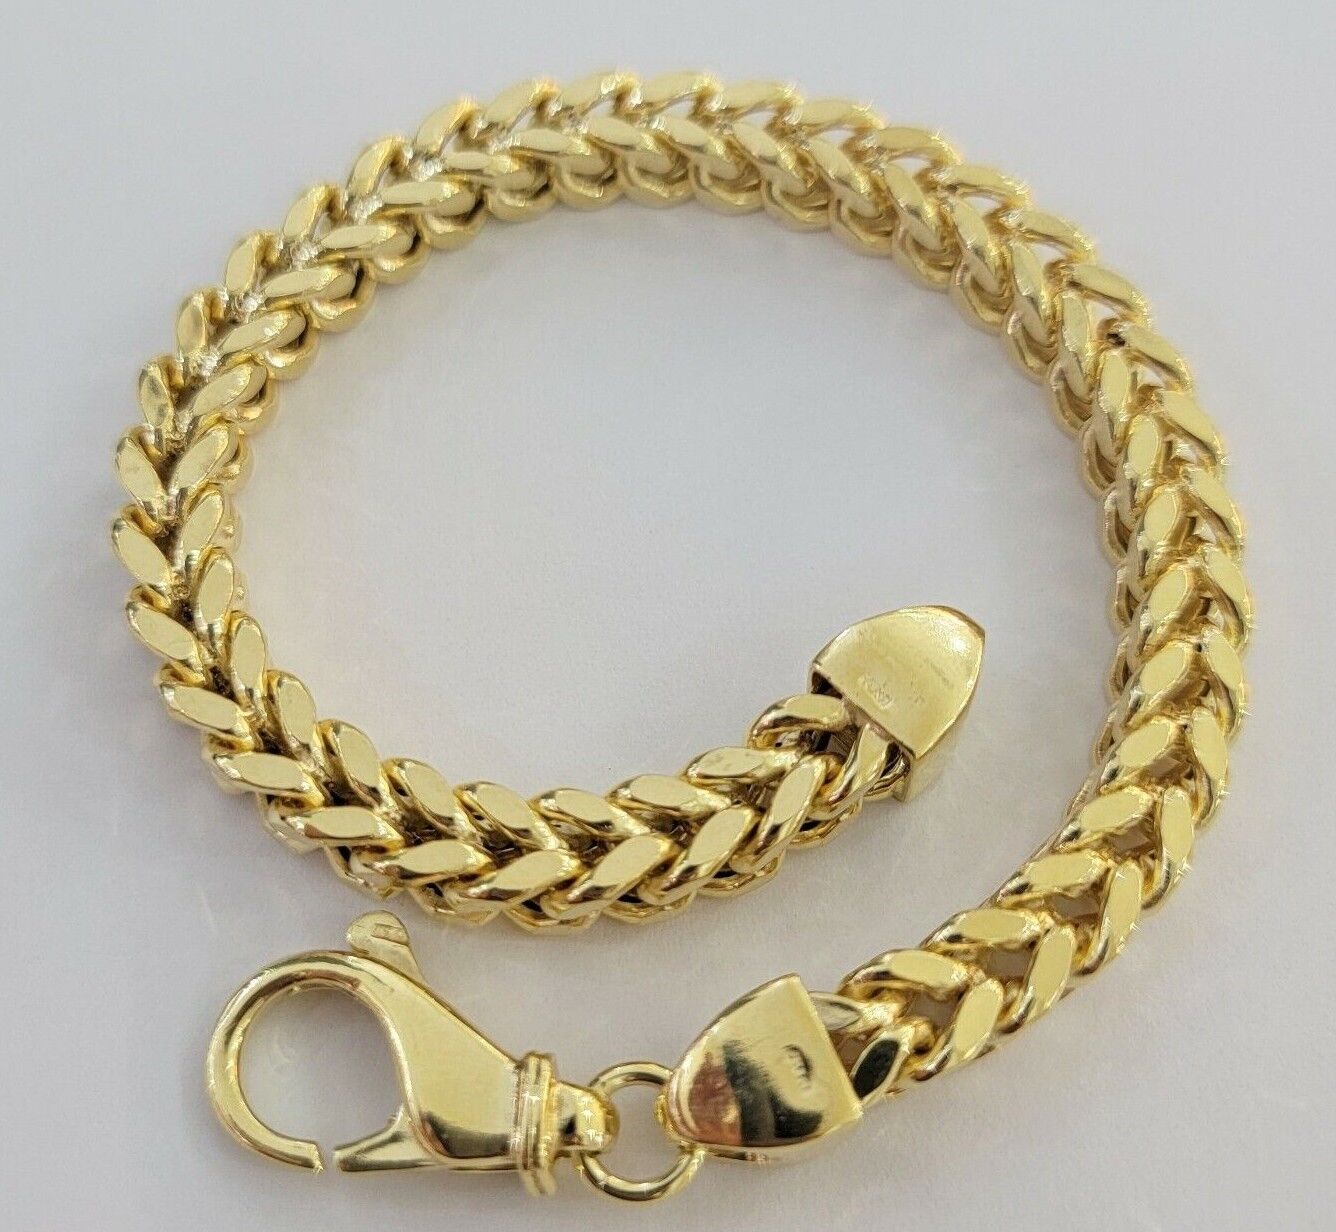 Solid 10K Real Gold Rope Bracelet Mens 10mm 8 inch 10kt Yellow Gold THICK&HEAVY